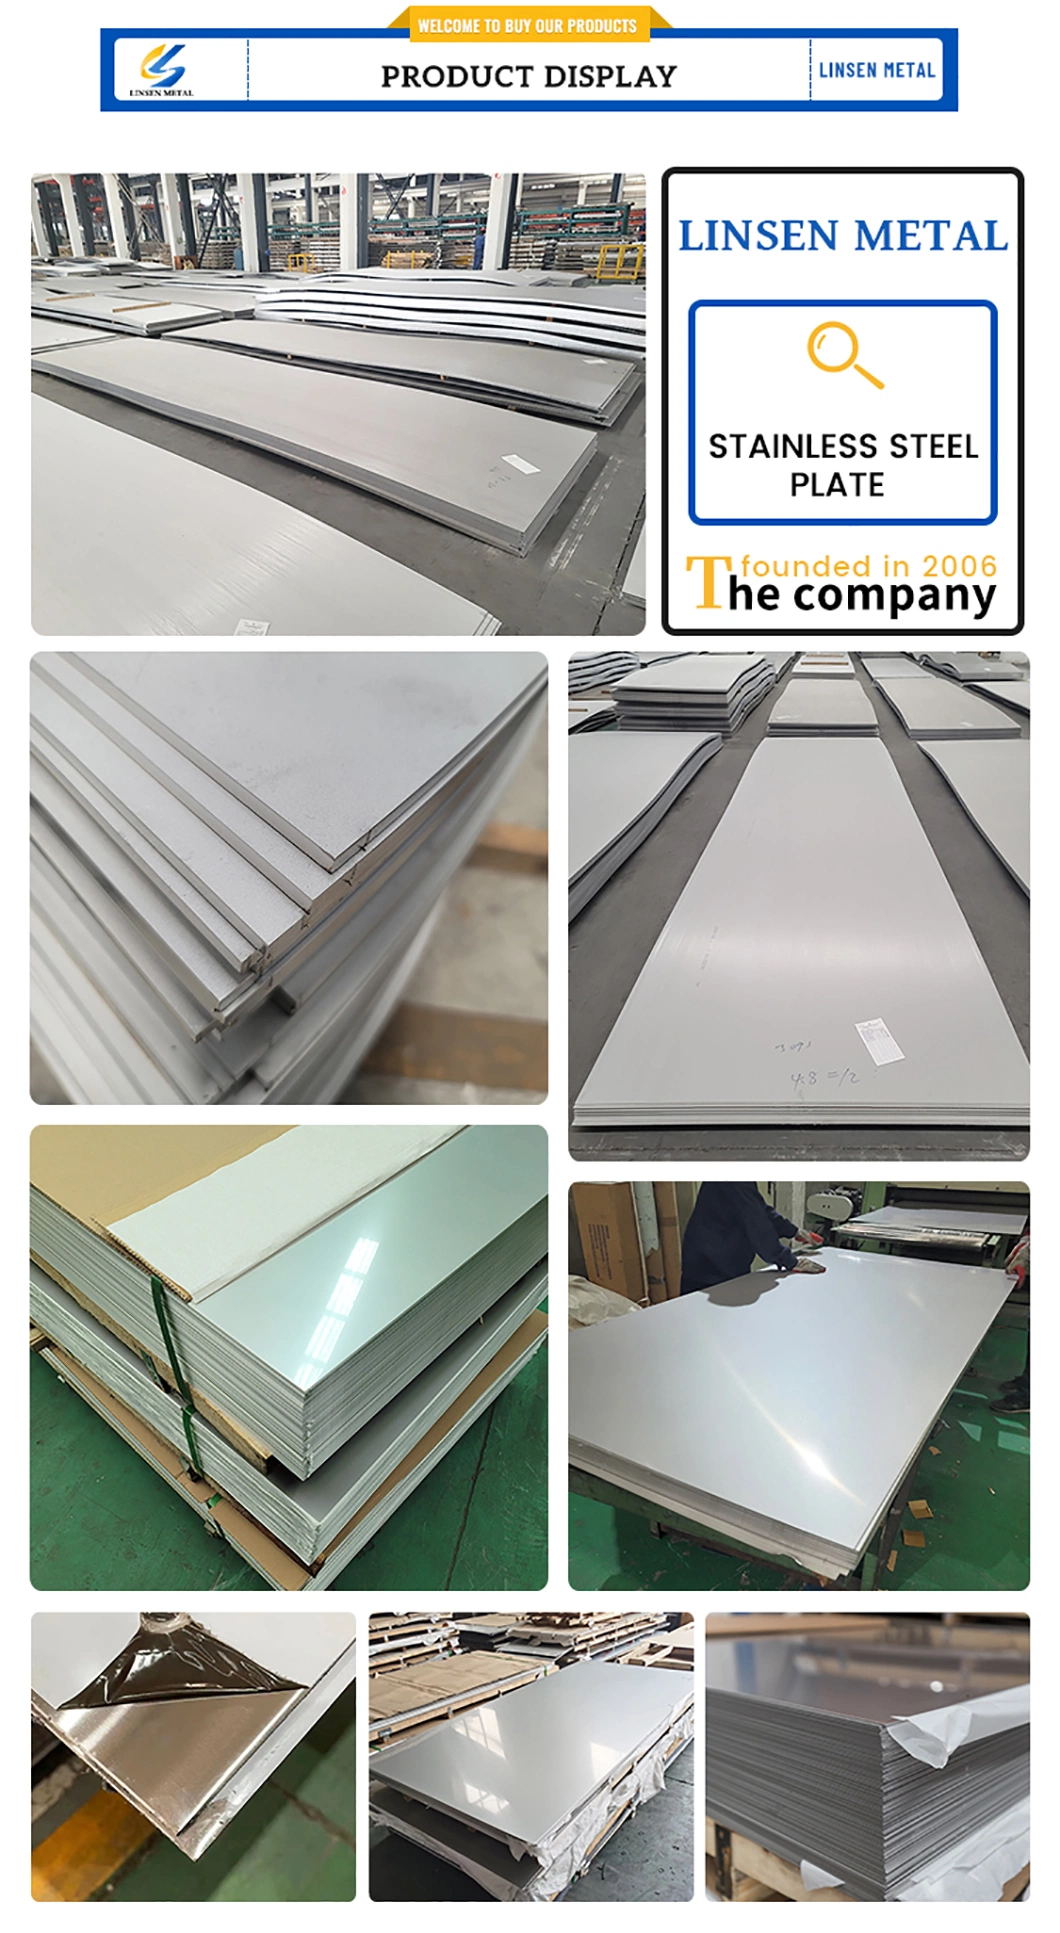 DIN 1.4301, 1.4016, 1.4006, 1.4002, 1.4125, 1.4501, 1.4362 Top Grade Quality Control Stainless Steel Sheet with Certificate